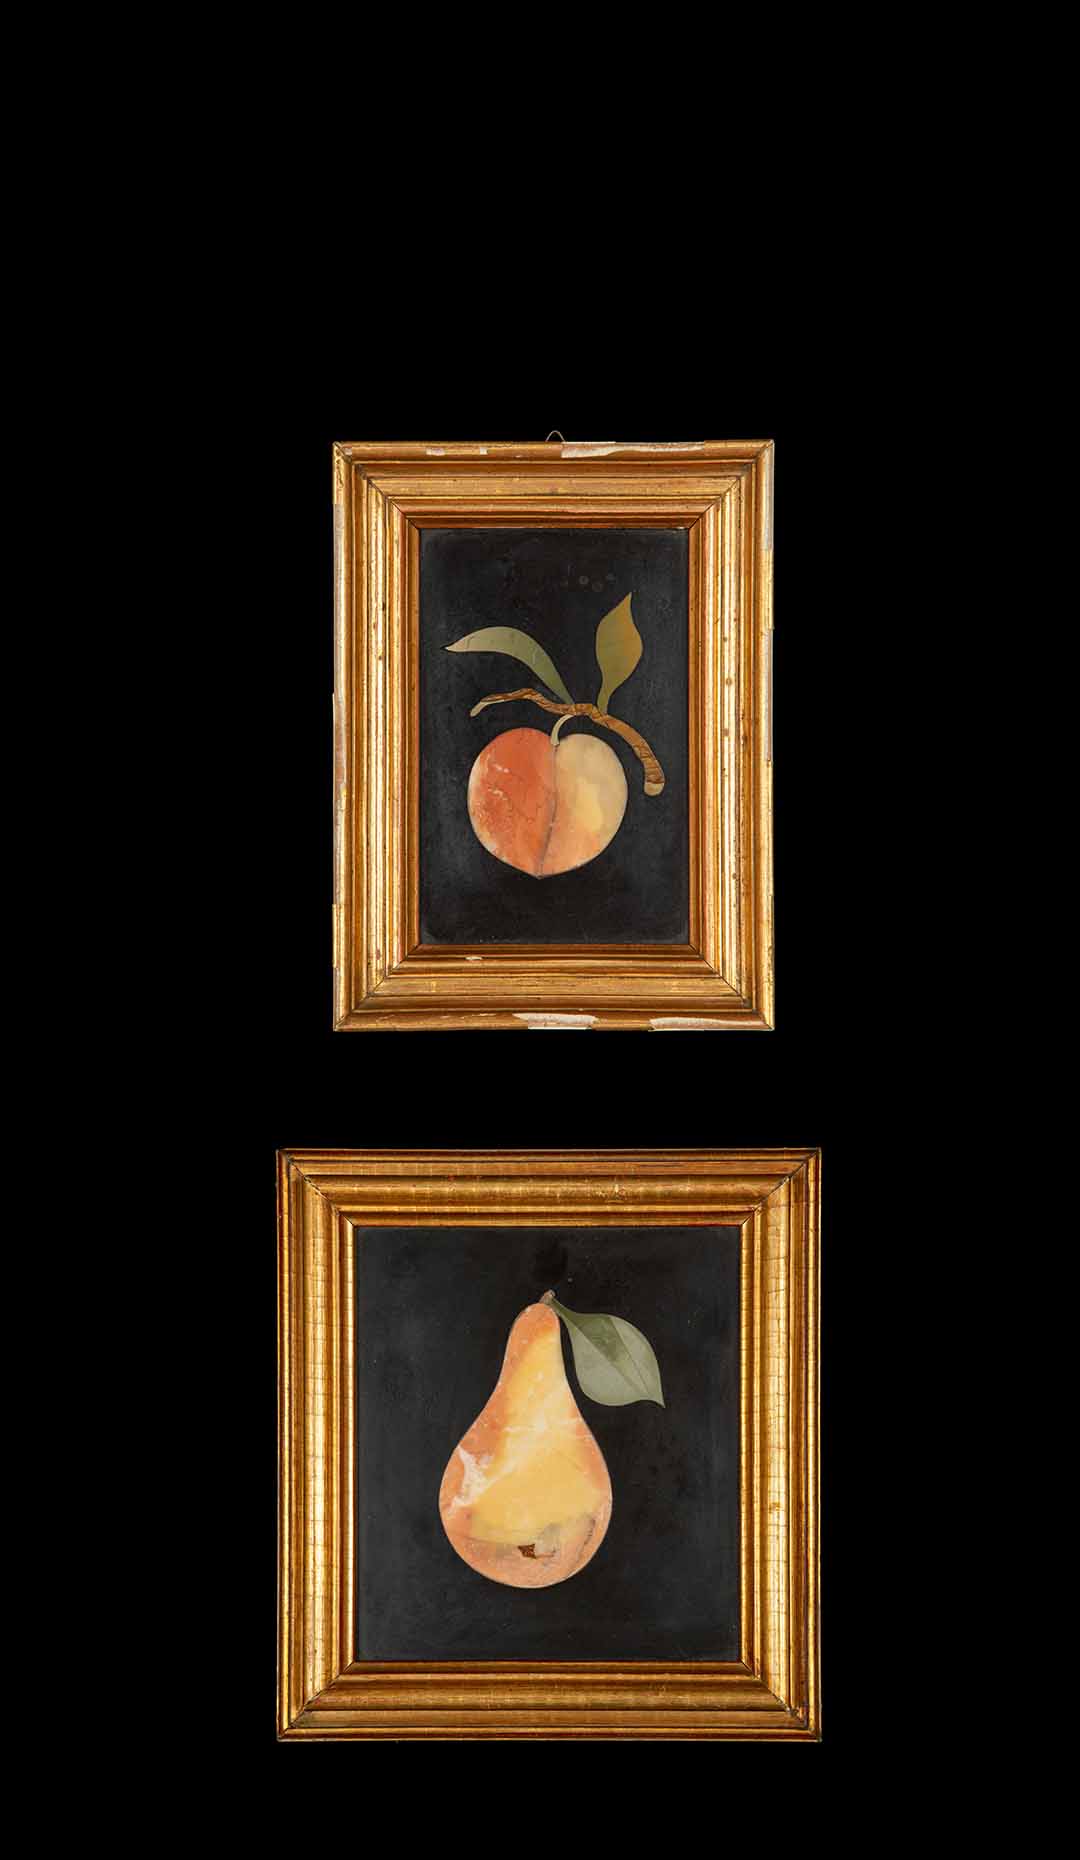 Pietra Dura Pear and Peach Pair Mosaic by G. Ugolini, Florence Italy